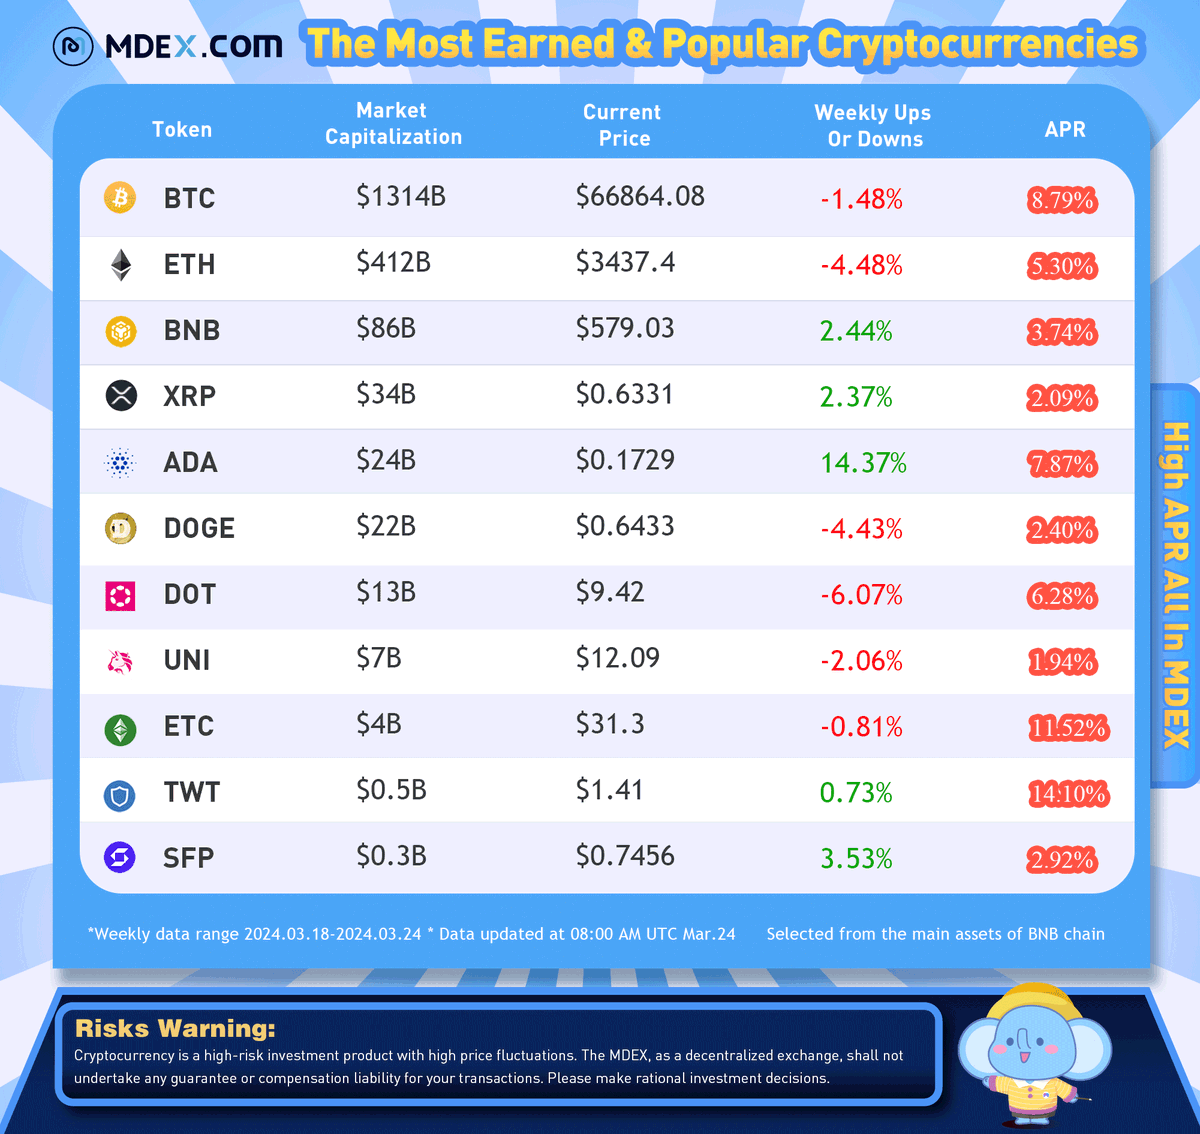 📈Check out the 'Most Earned & Popular Major #Cryptocurrencies Ranking' with the highest #APR on MDEX.com on #BNBChain from Mar 18-Mar 24. 💜Stay tuned to @Mdextech for more updates on HIGH APR #Cryptocurrencies. #BTC #ETH #BNB #XRP $tip #USTC